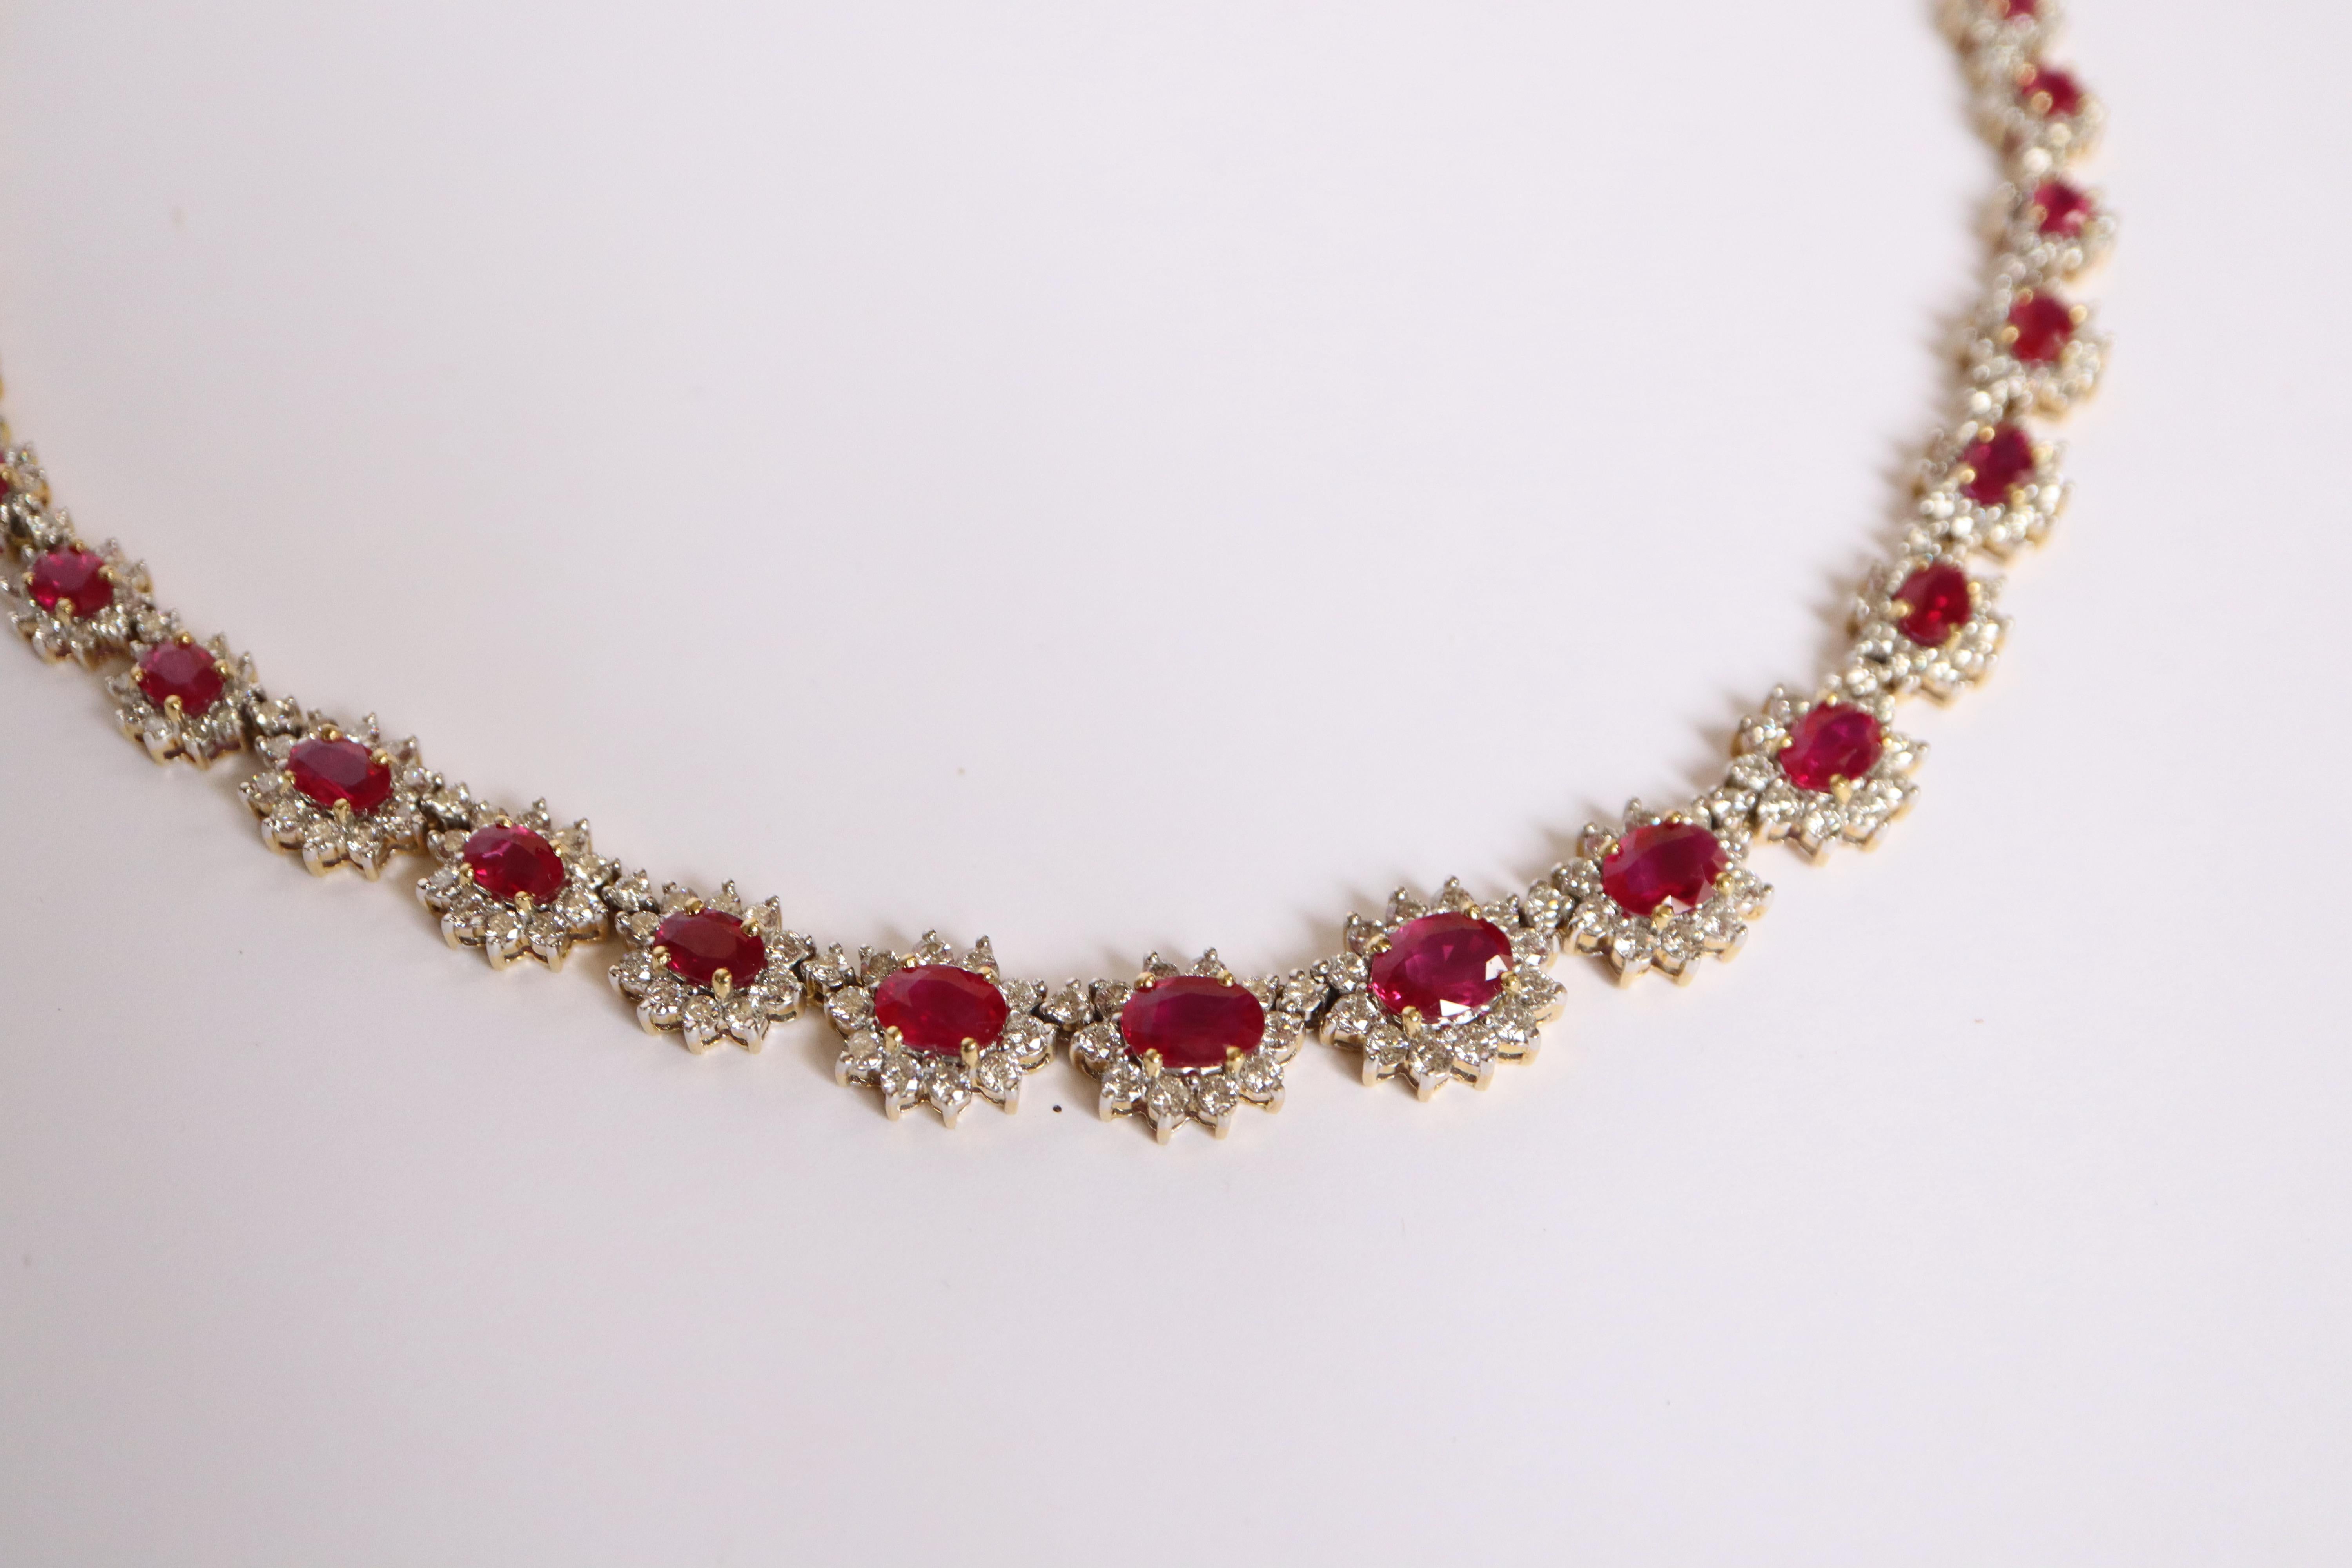 Drop necklace in 18k white and yellow gold, rubies and diamonds. It is composed of 45 daisy motifs each adorned with a central ruby ​​surrounded by diamonds. Setting in 18 kt white gold for the diamonds and in 18 kt yellow gold for the claw setting